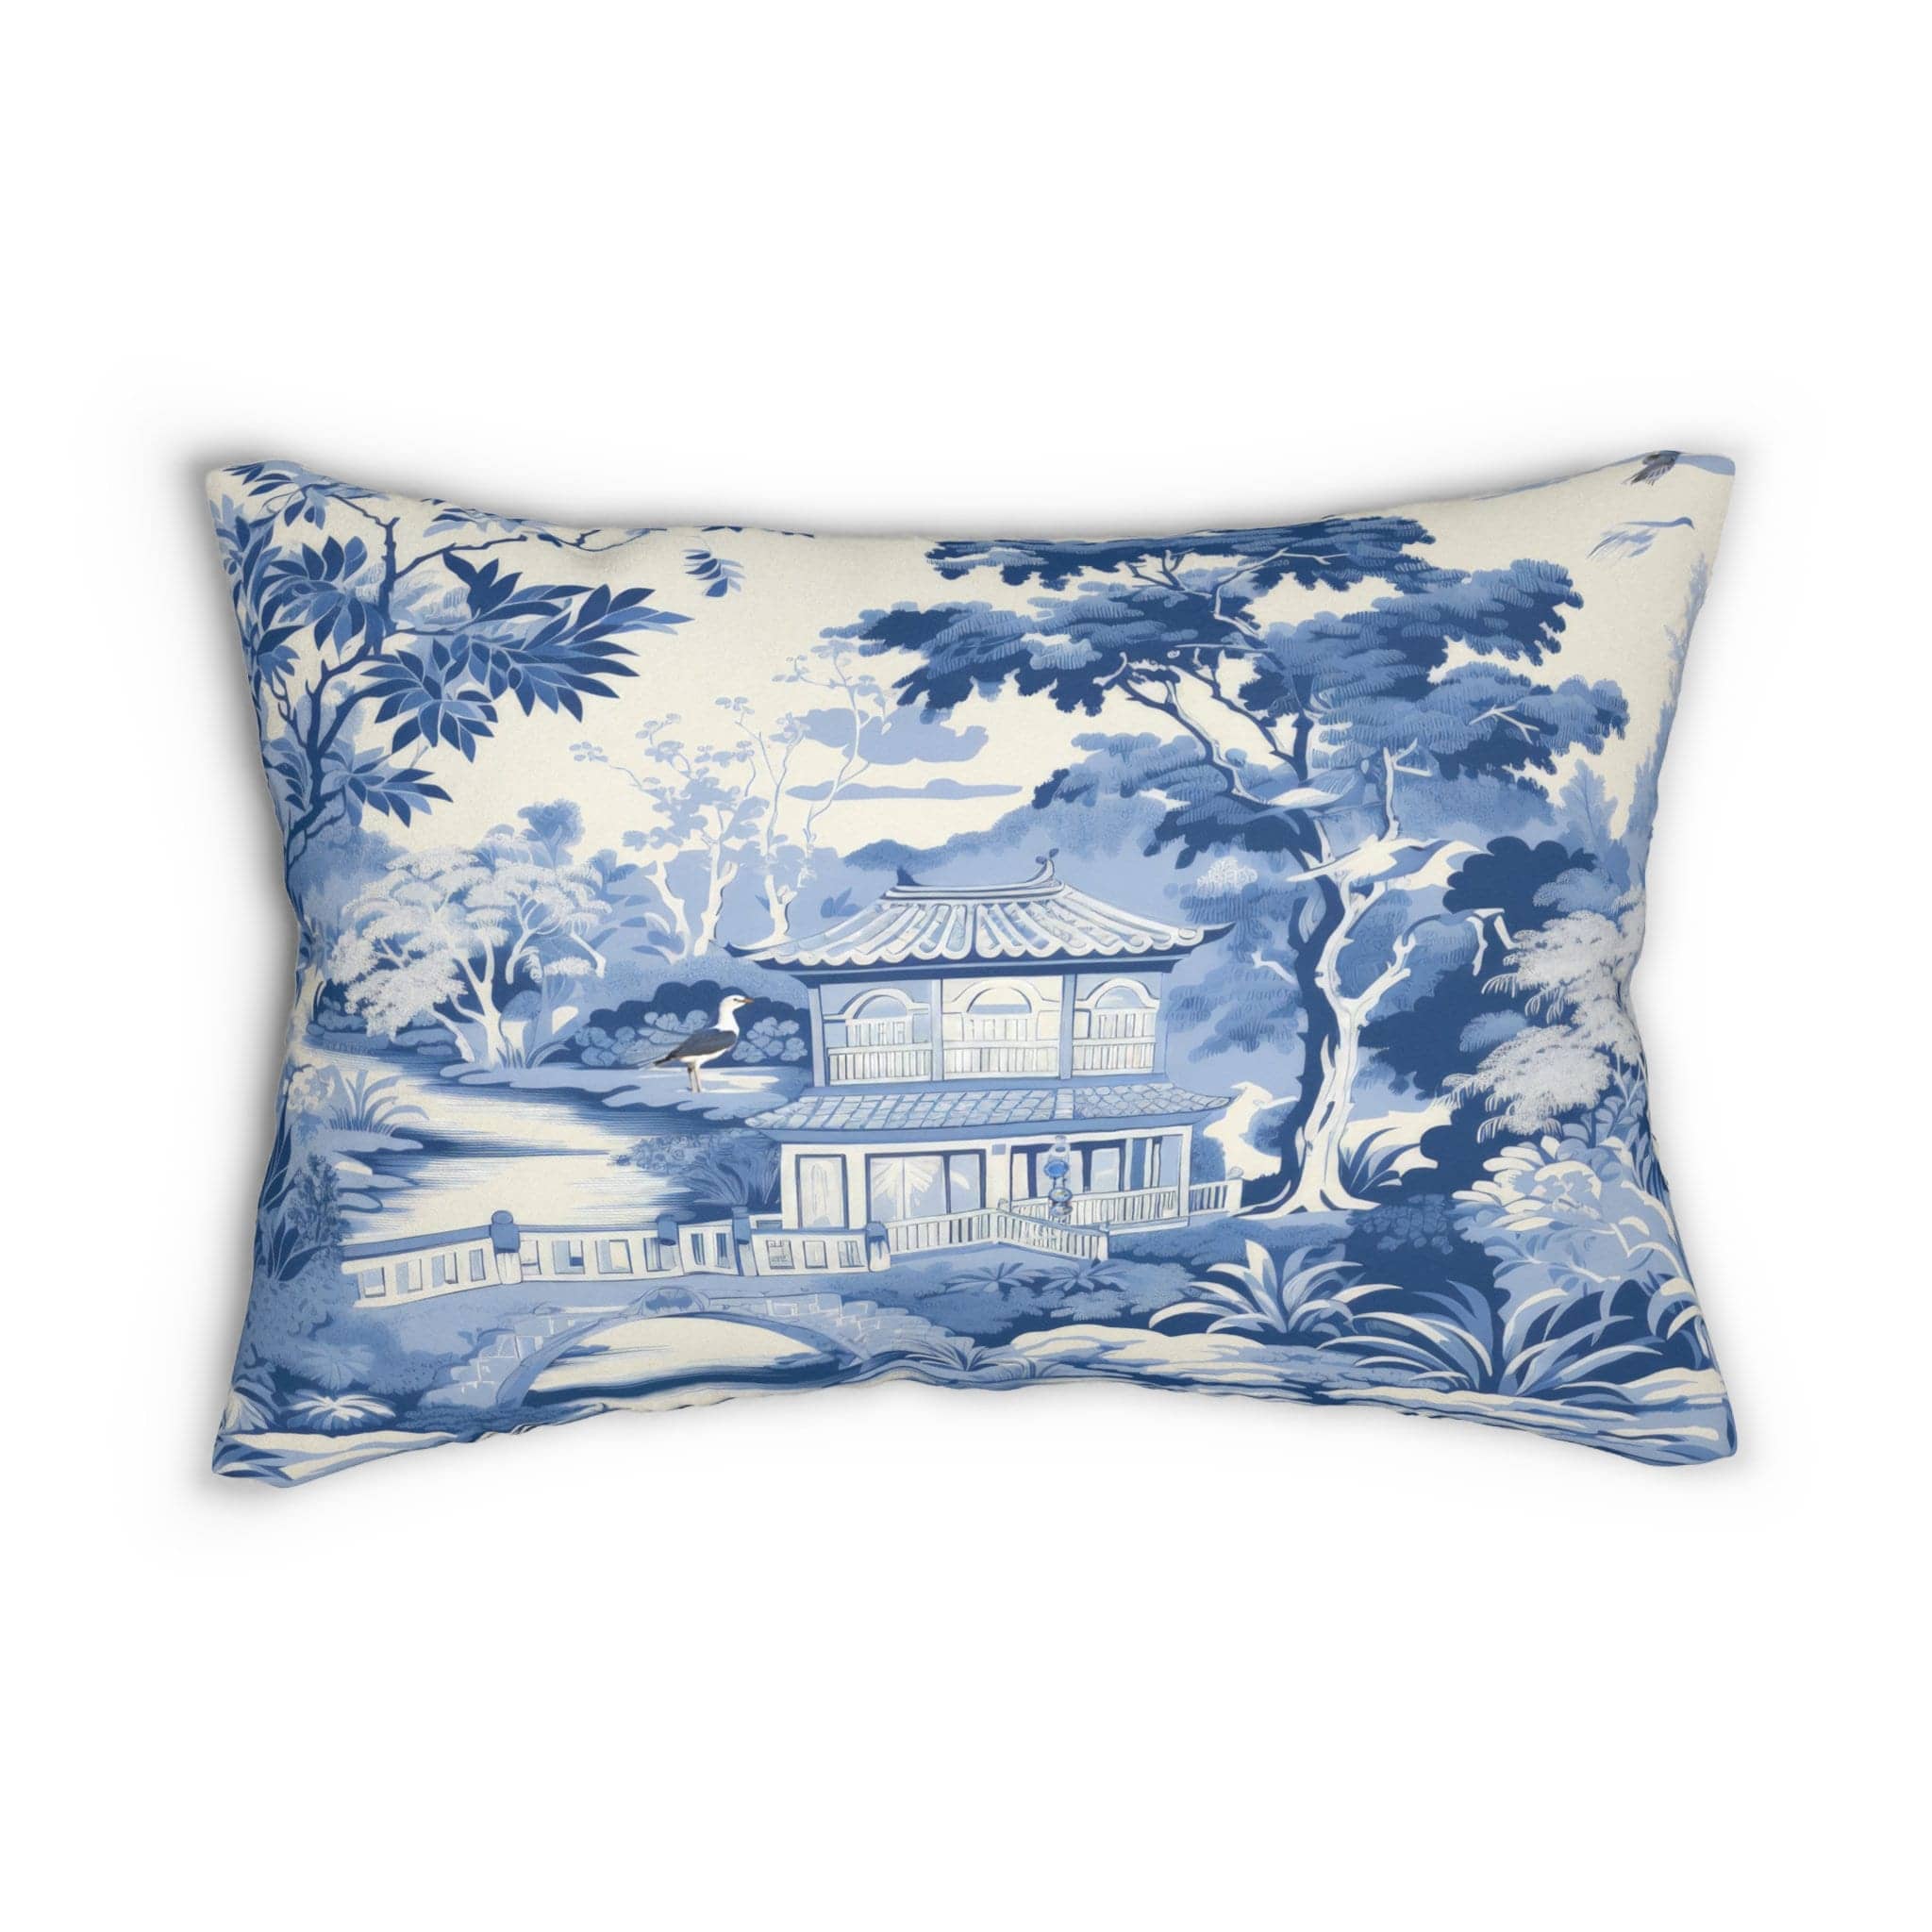 Kate McEnroe New York Chinoiserie Pagoda Floral Lumbar Pillow, Country Farmhouse Grandmillenial Living Room, Bedroom Accent Pillow - 12058823 21141585544401696250